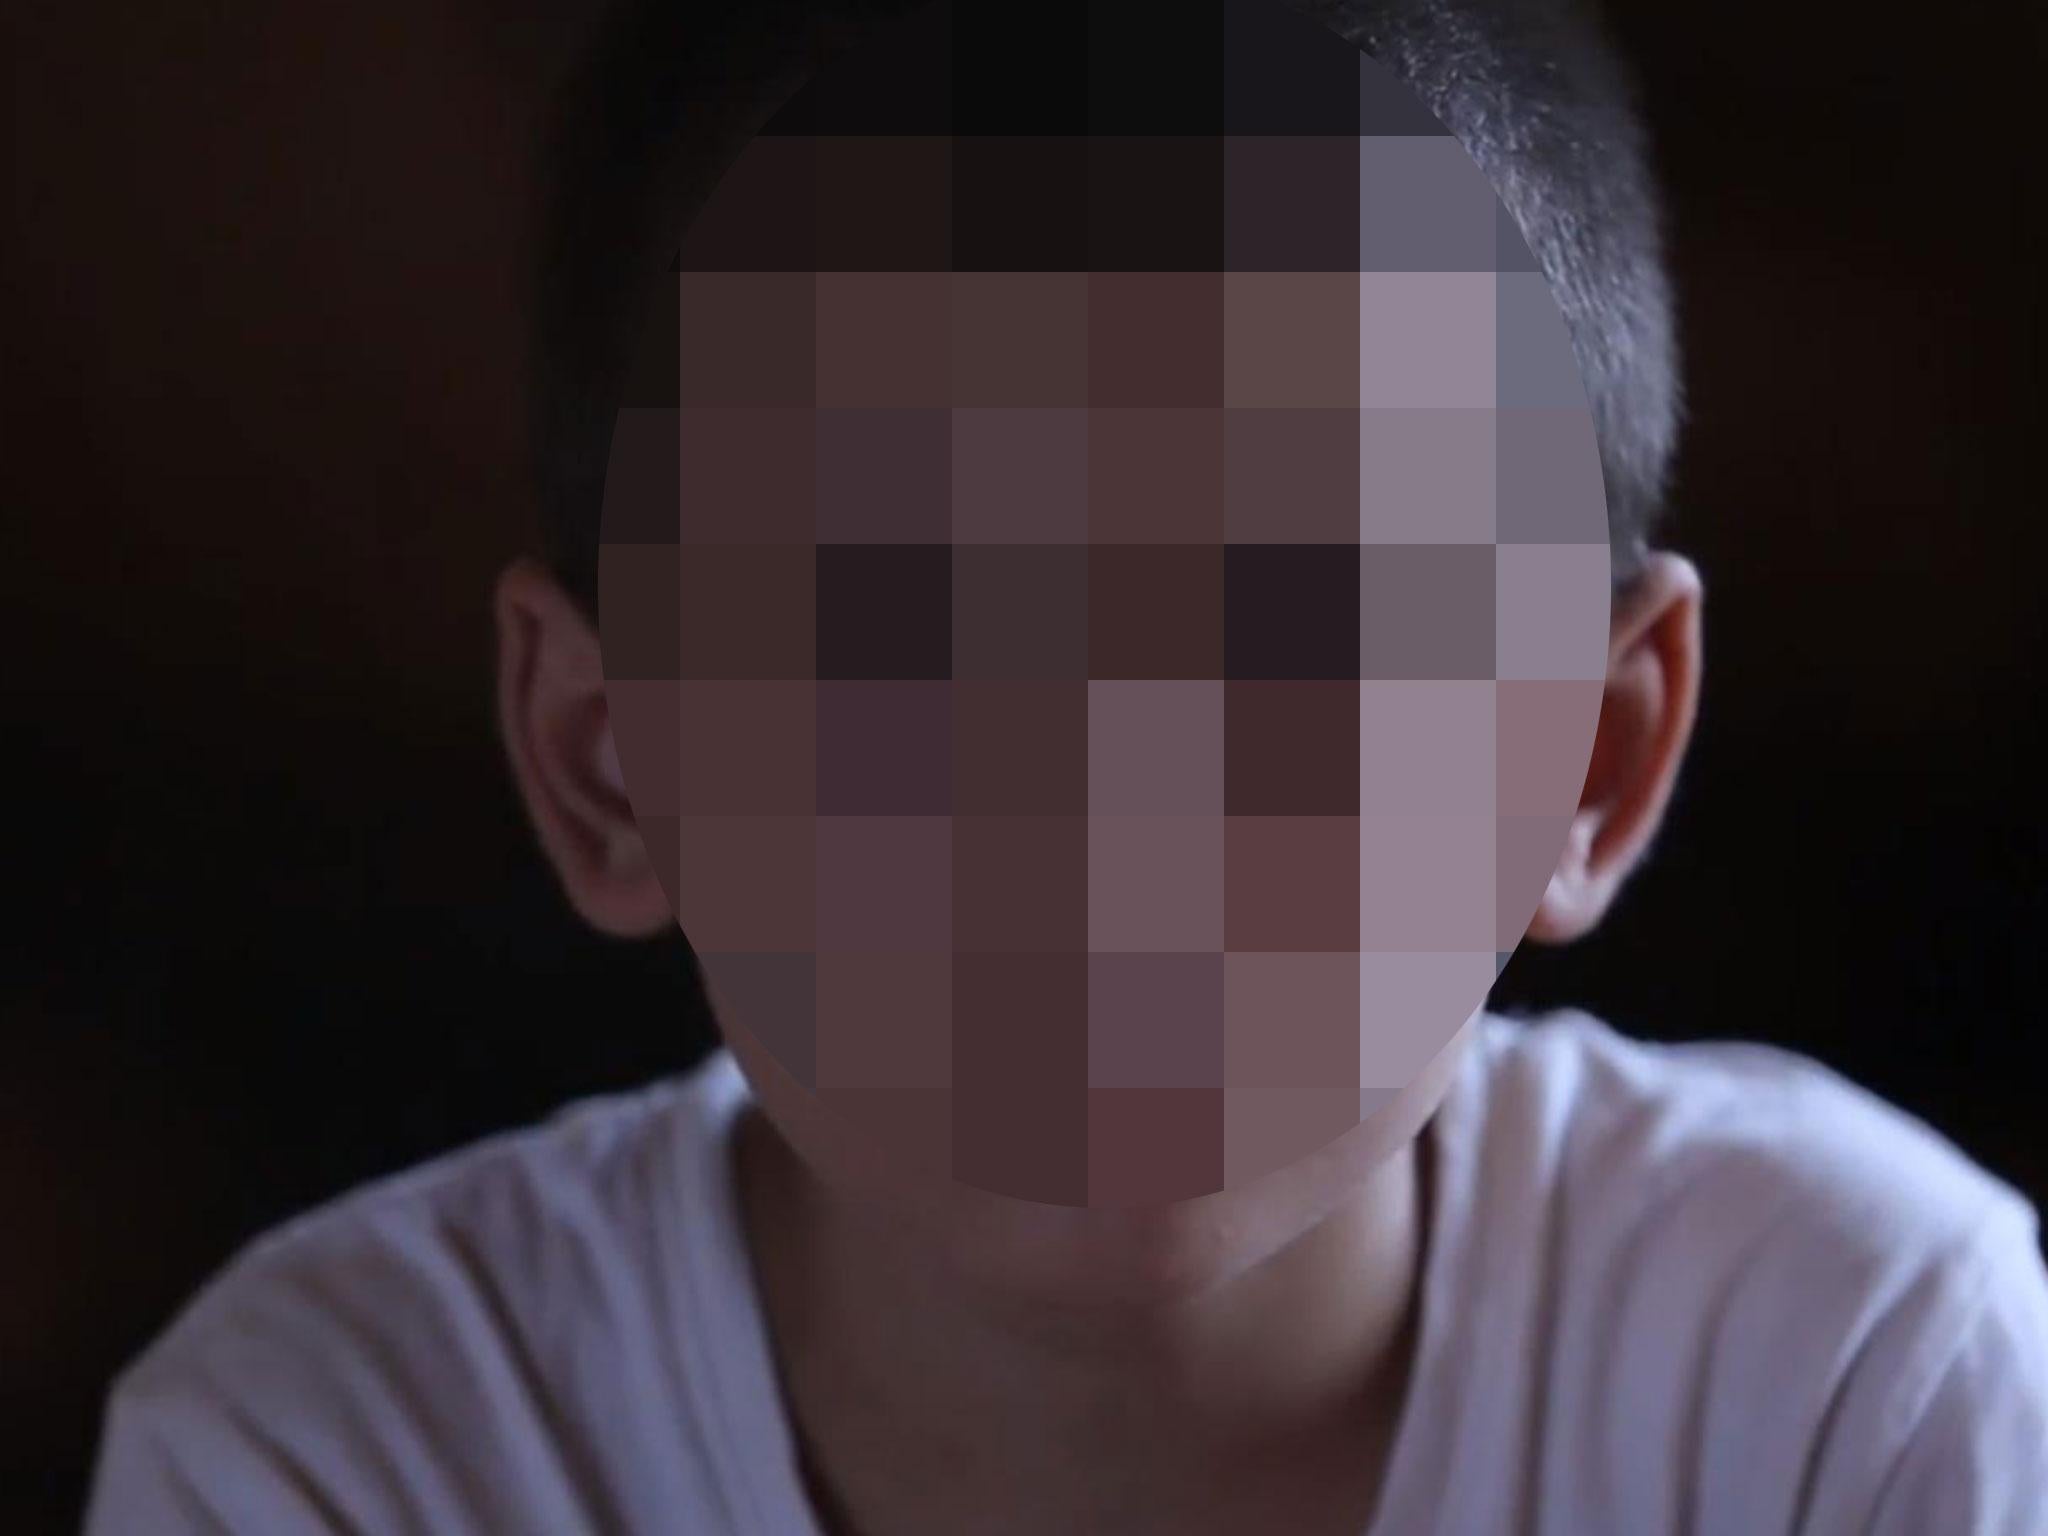 A 10-year-old American boy named as Yusuf in an Isis propaganda video released in August 2017